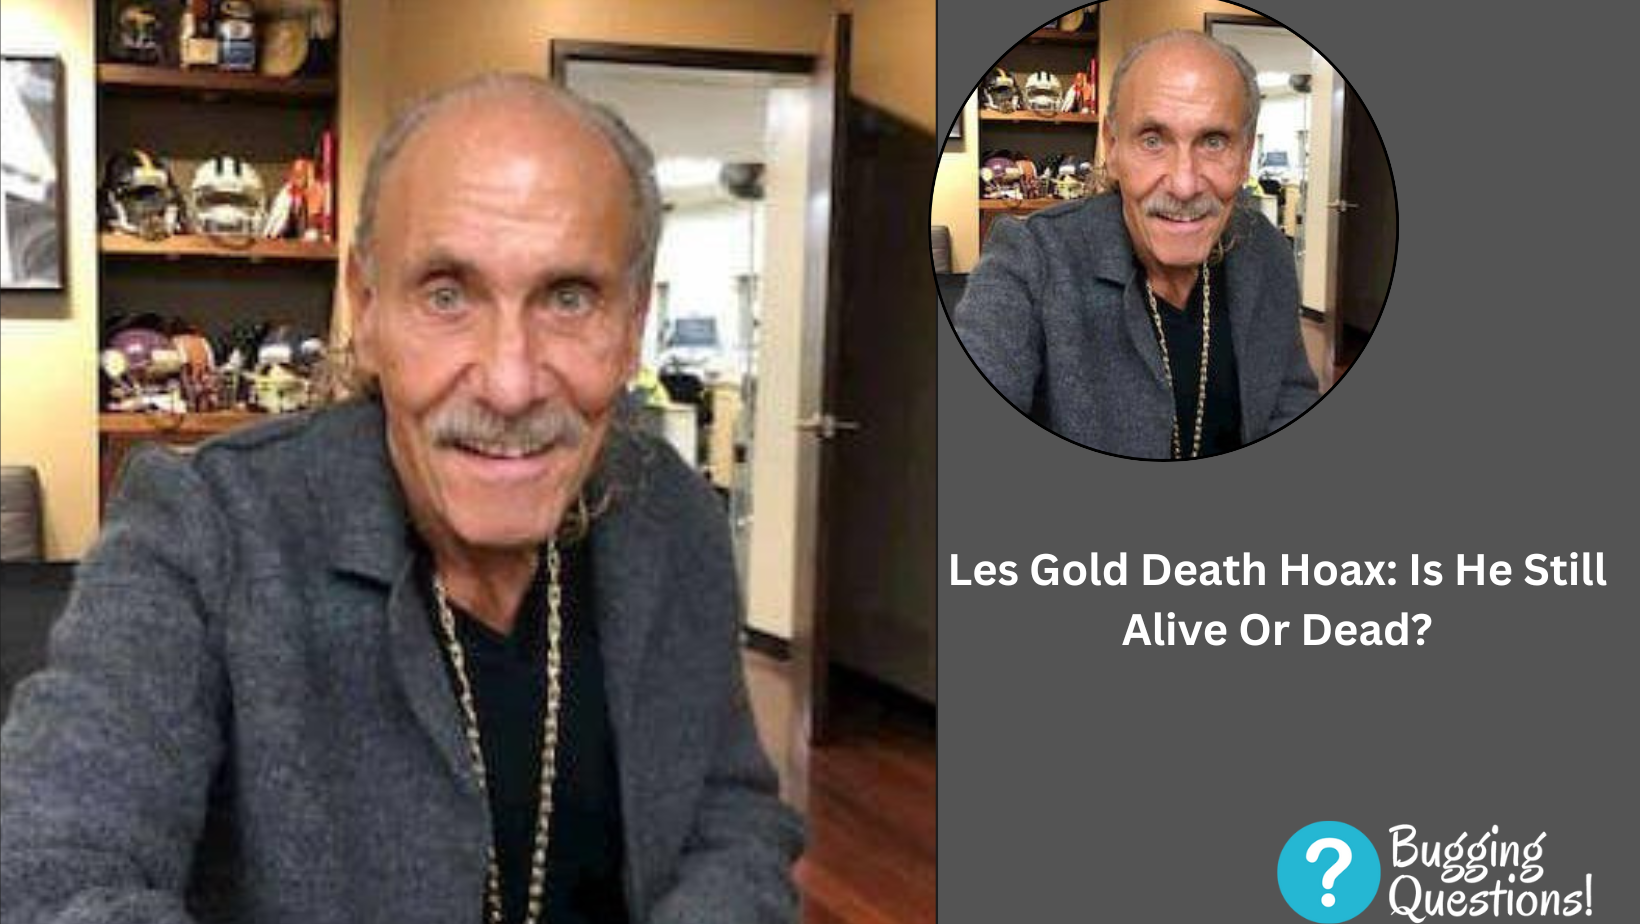 Les Gold Death Hoax: Is He Still Alive Or Dead?